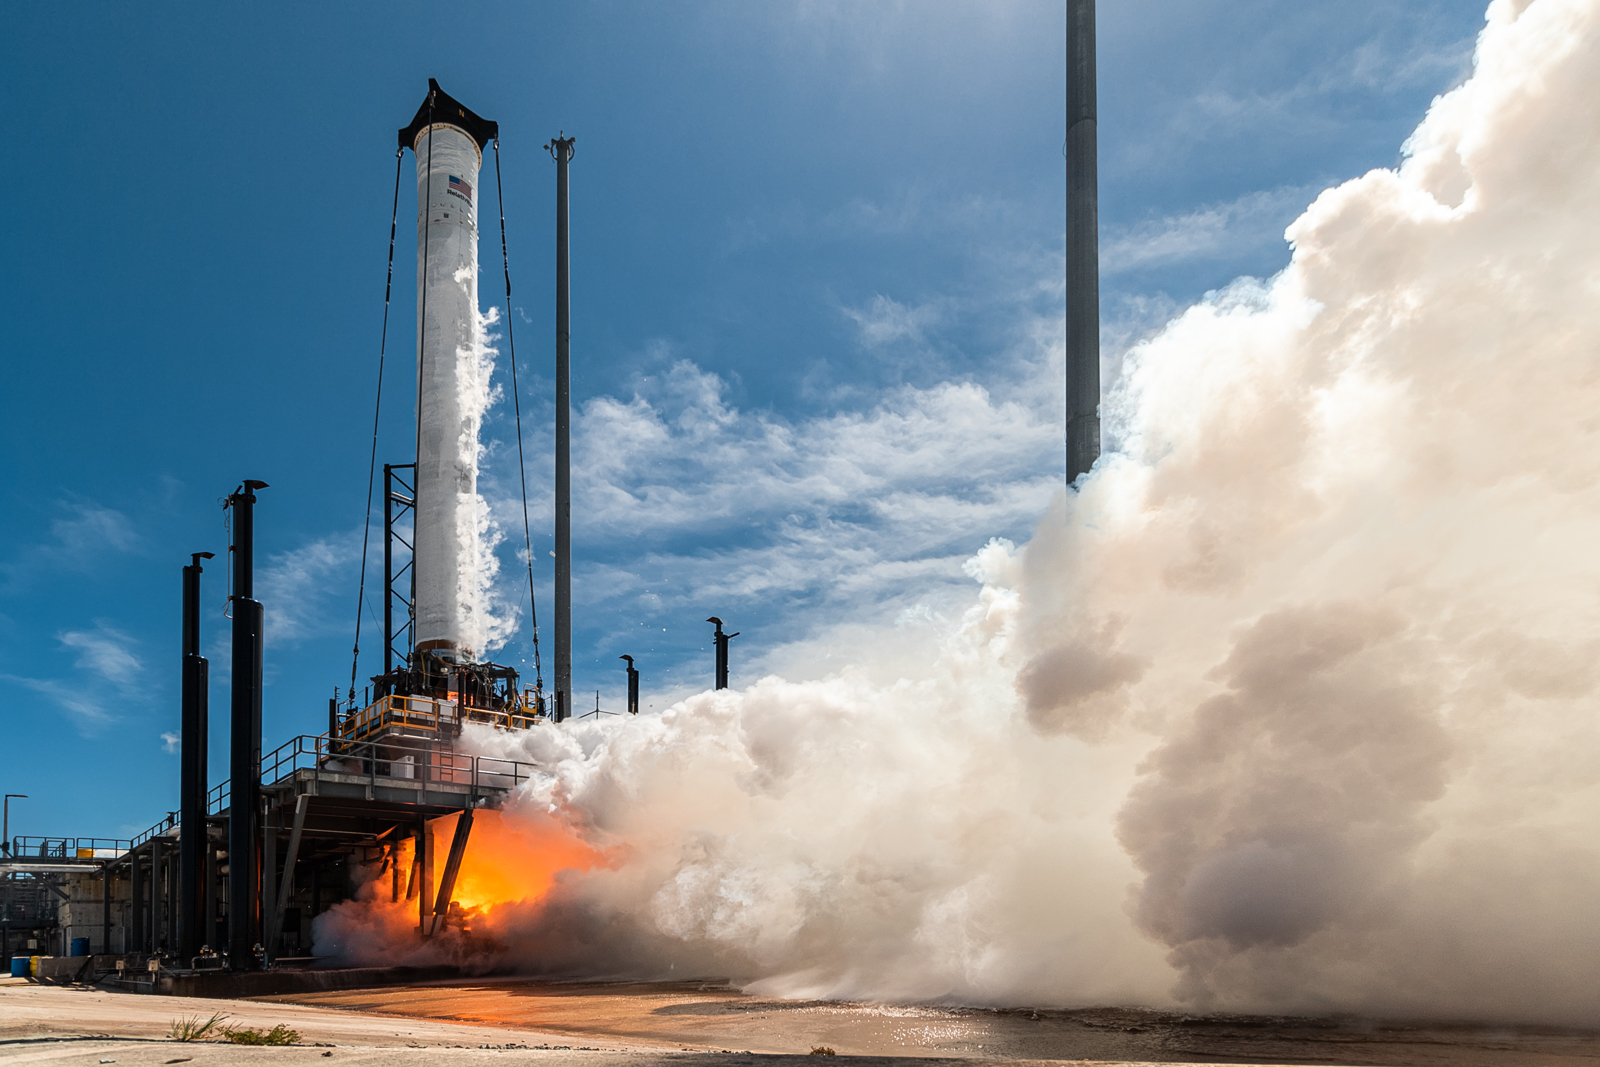 Stage one of Relativity SpaceX's Terran 1 rocket undergoes testing at Launch Complex-16 in Florida.